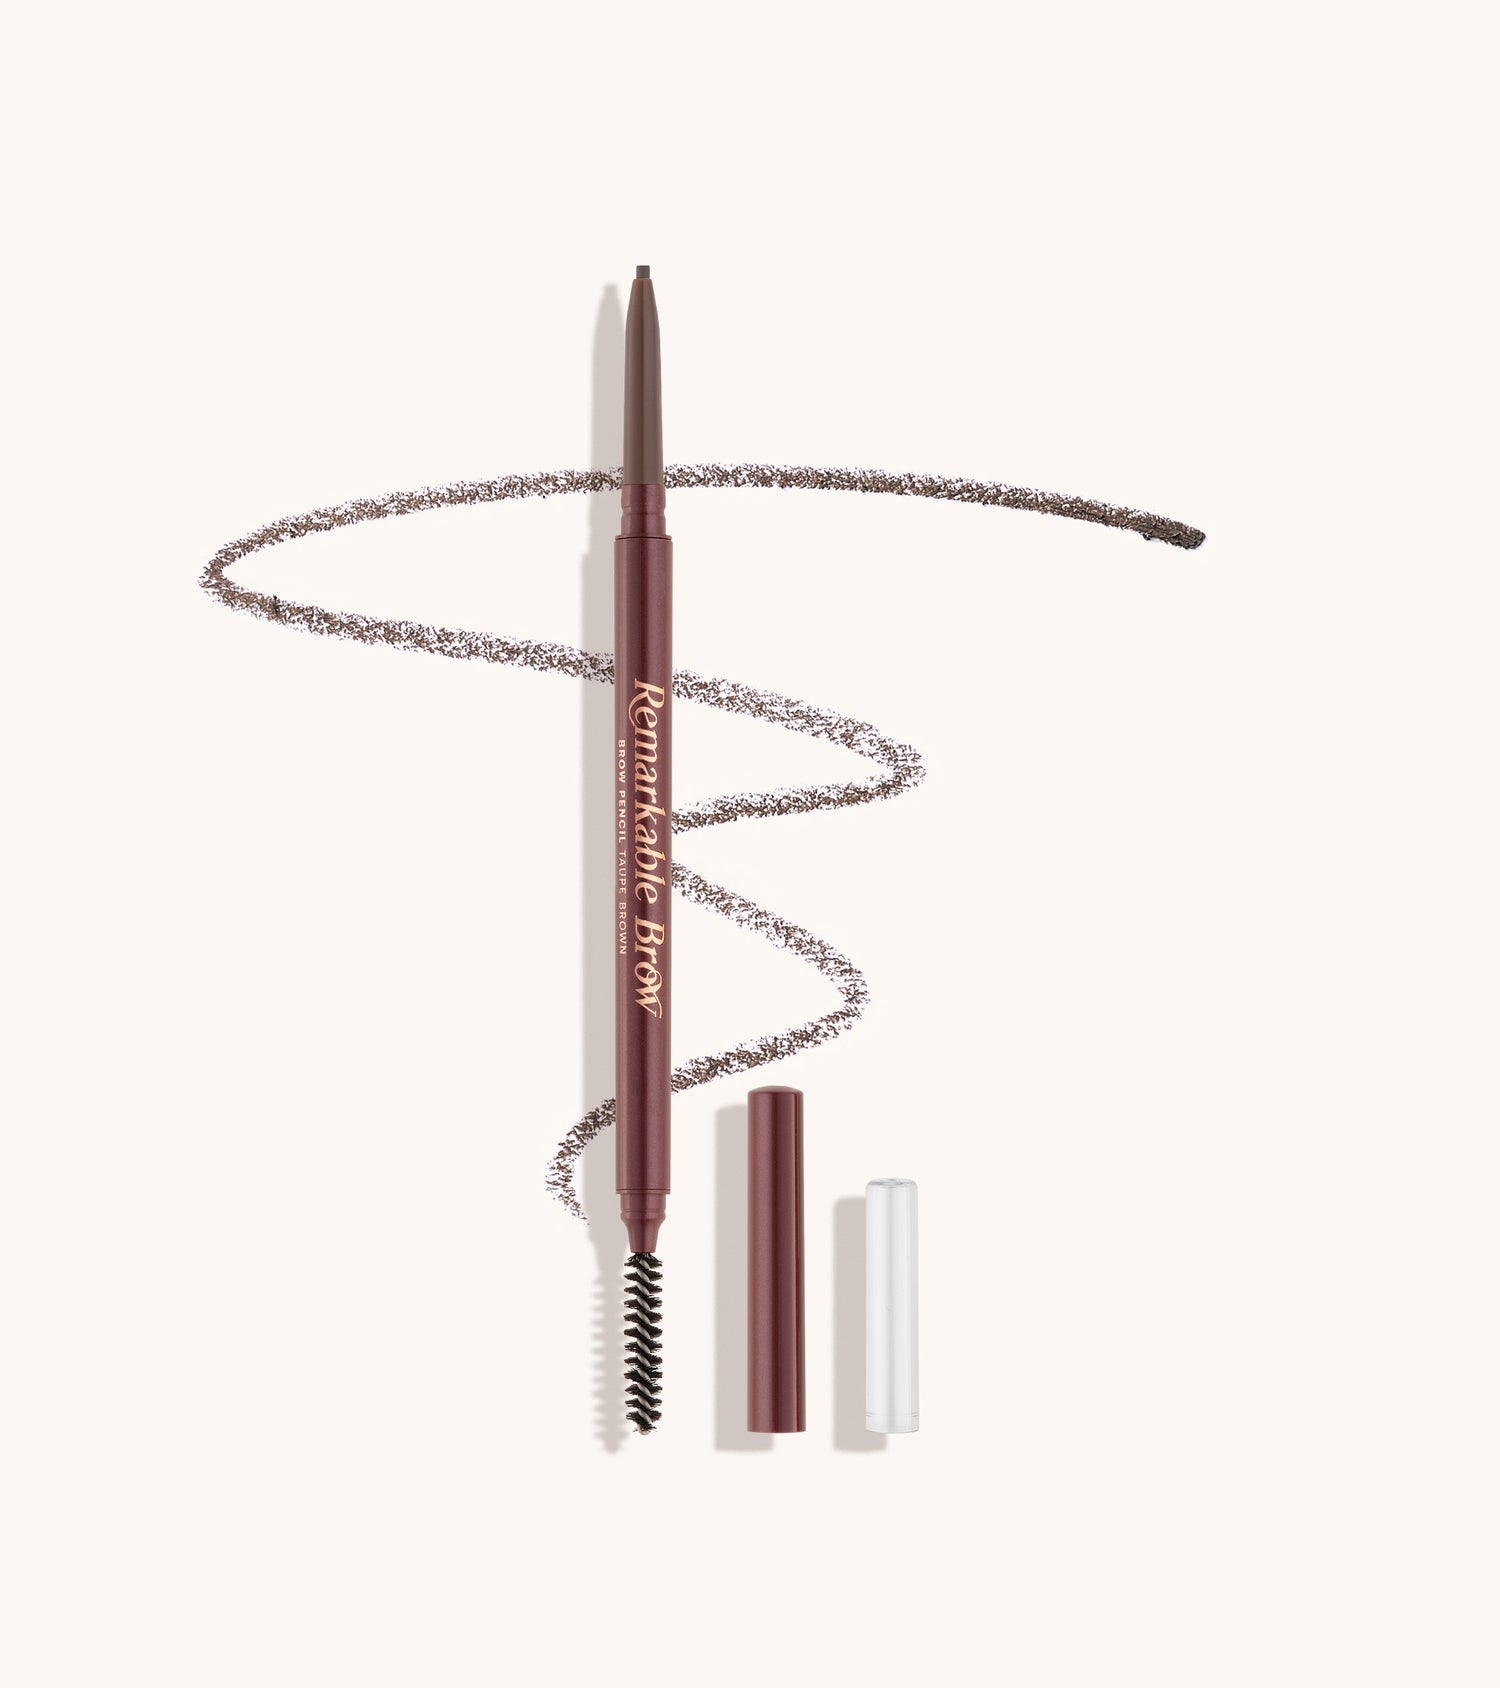 ZOEVA - Remarkable Brow Pencil (Taupe Brown) - 